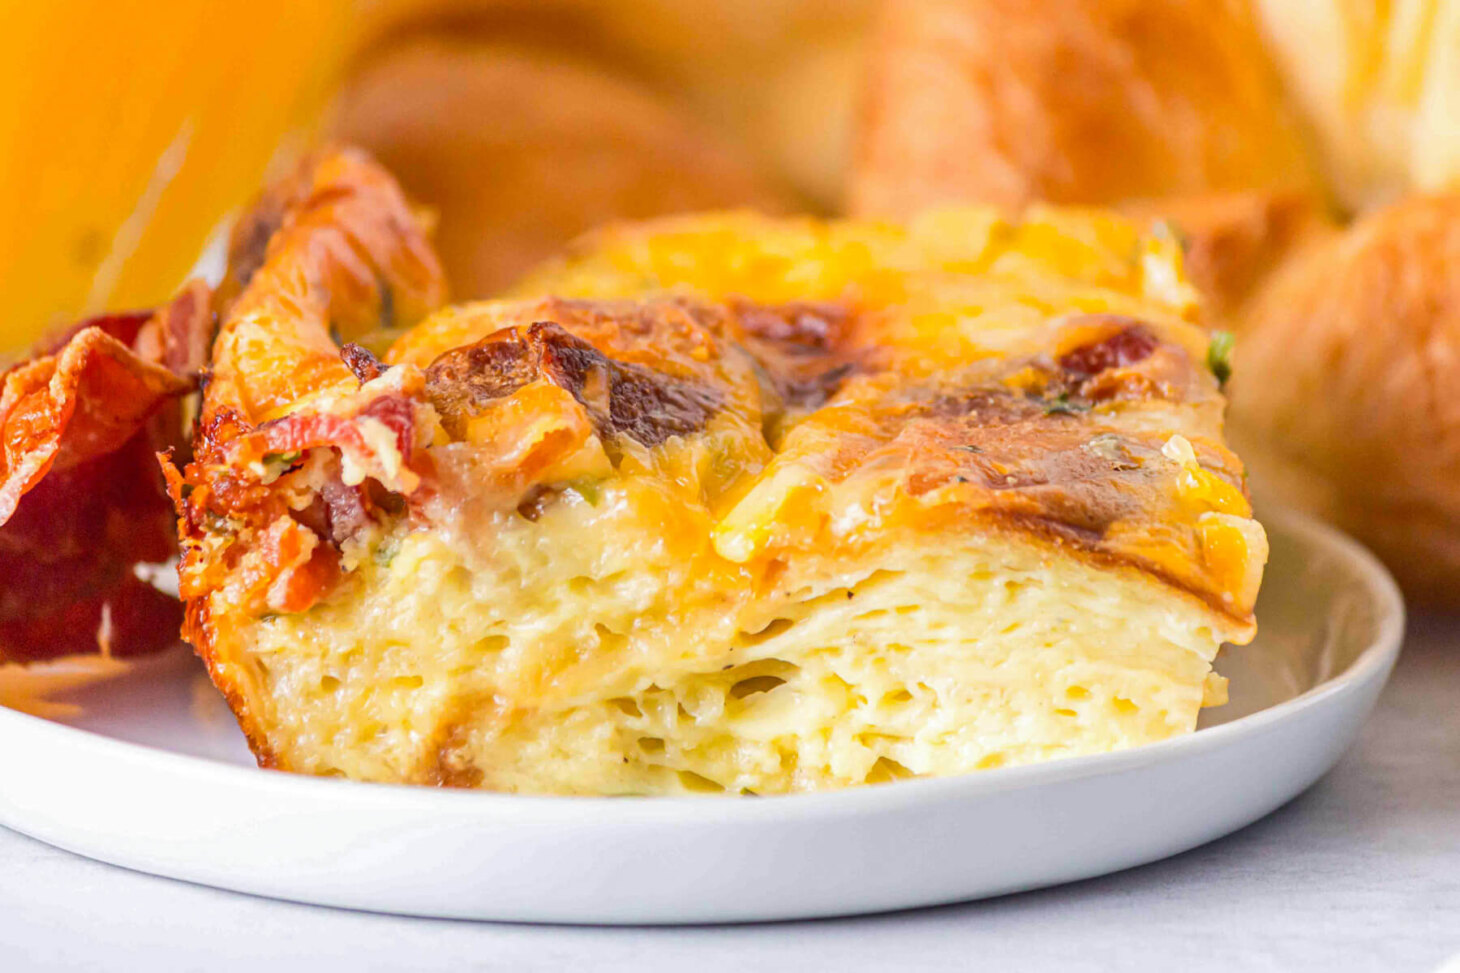 A square serving of Croissant breakfast casserole showing the layers of eggs, croissants, bacon, and cheese.